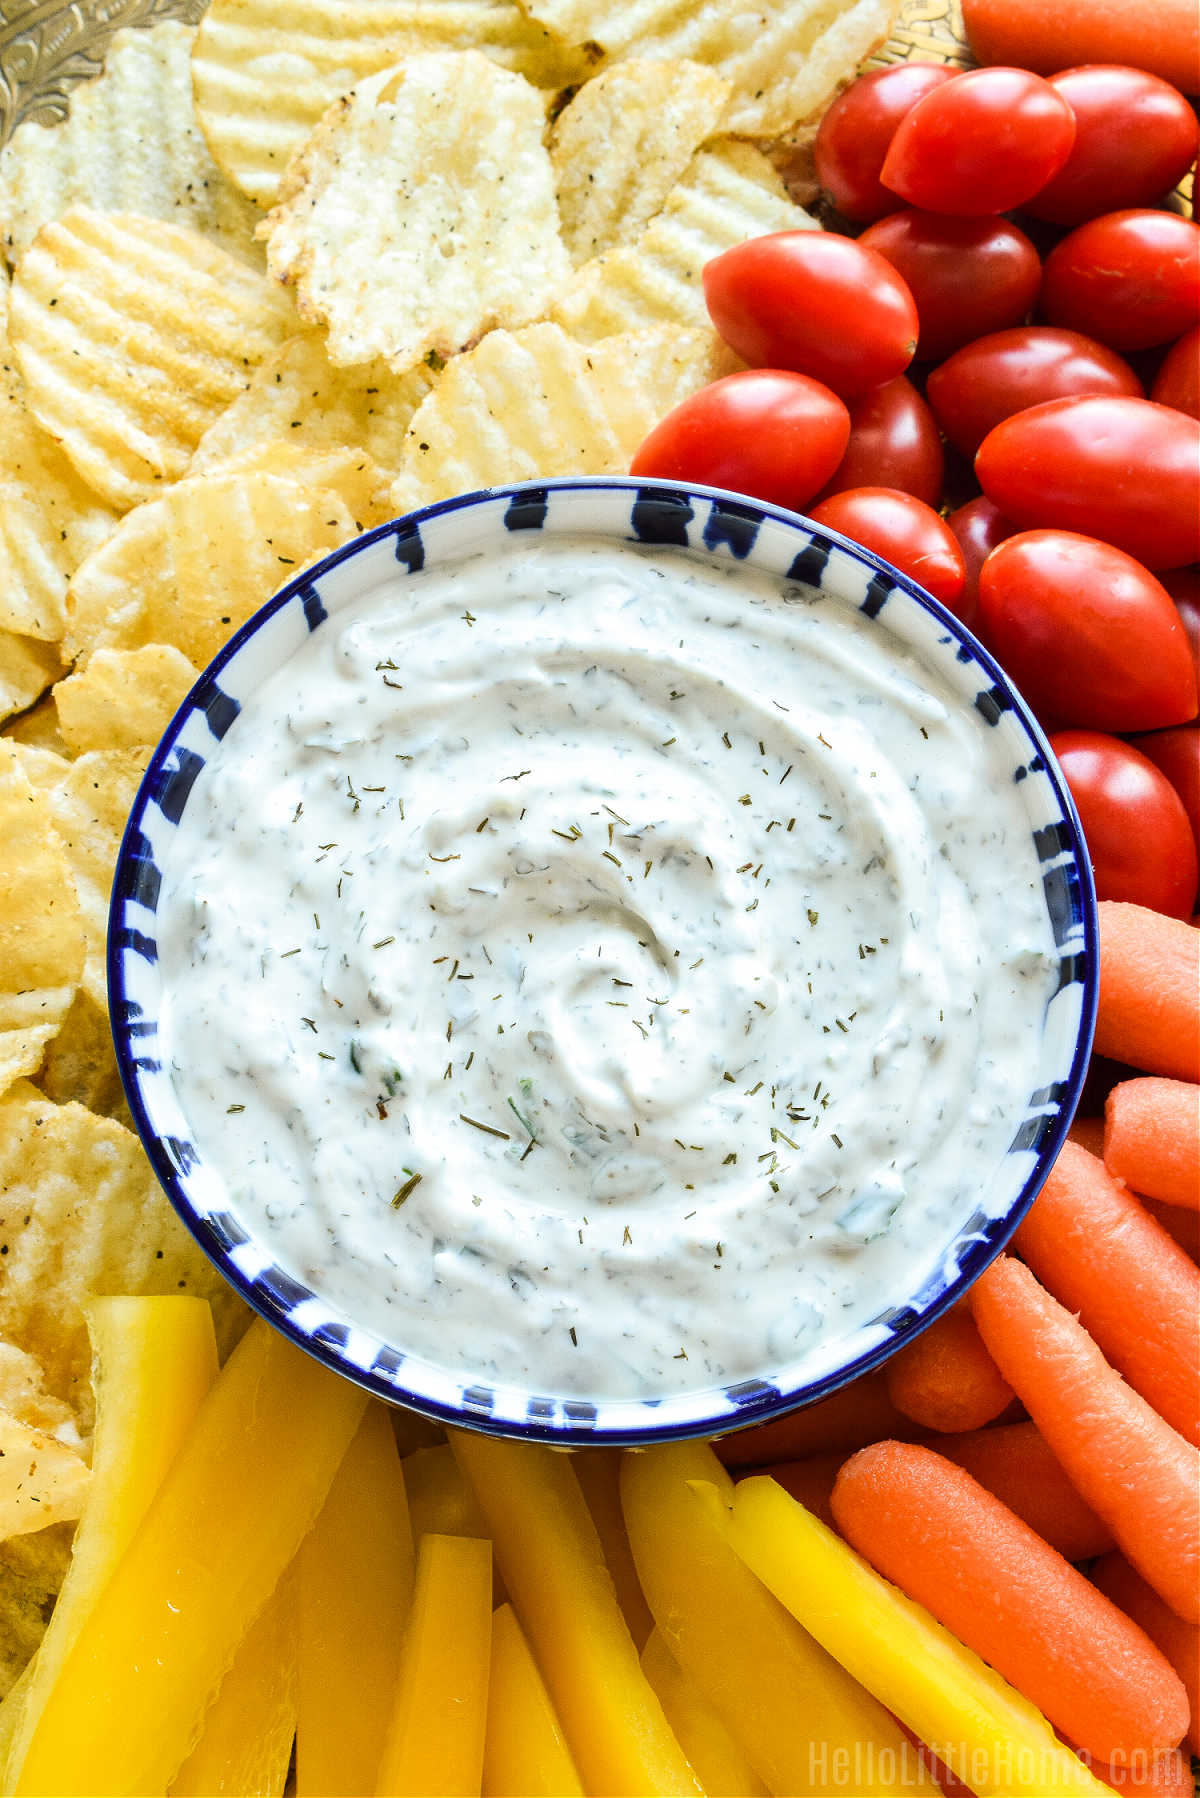 A tray topped with chips, veggies, and the finished dip.